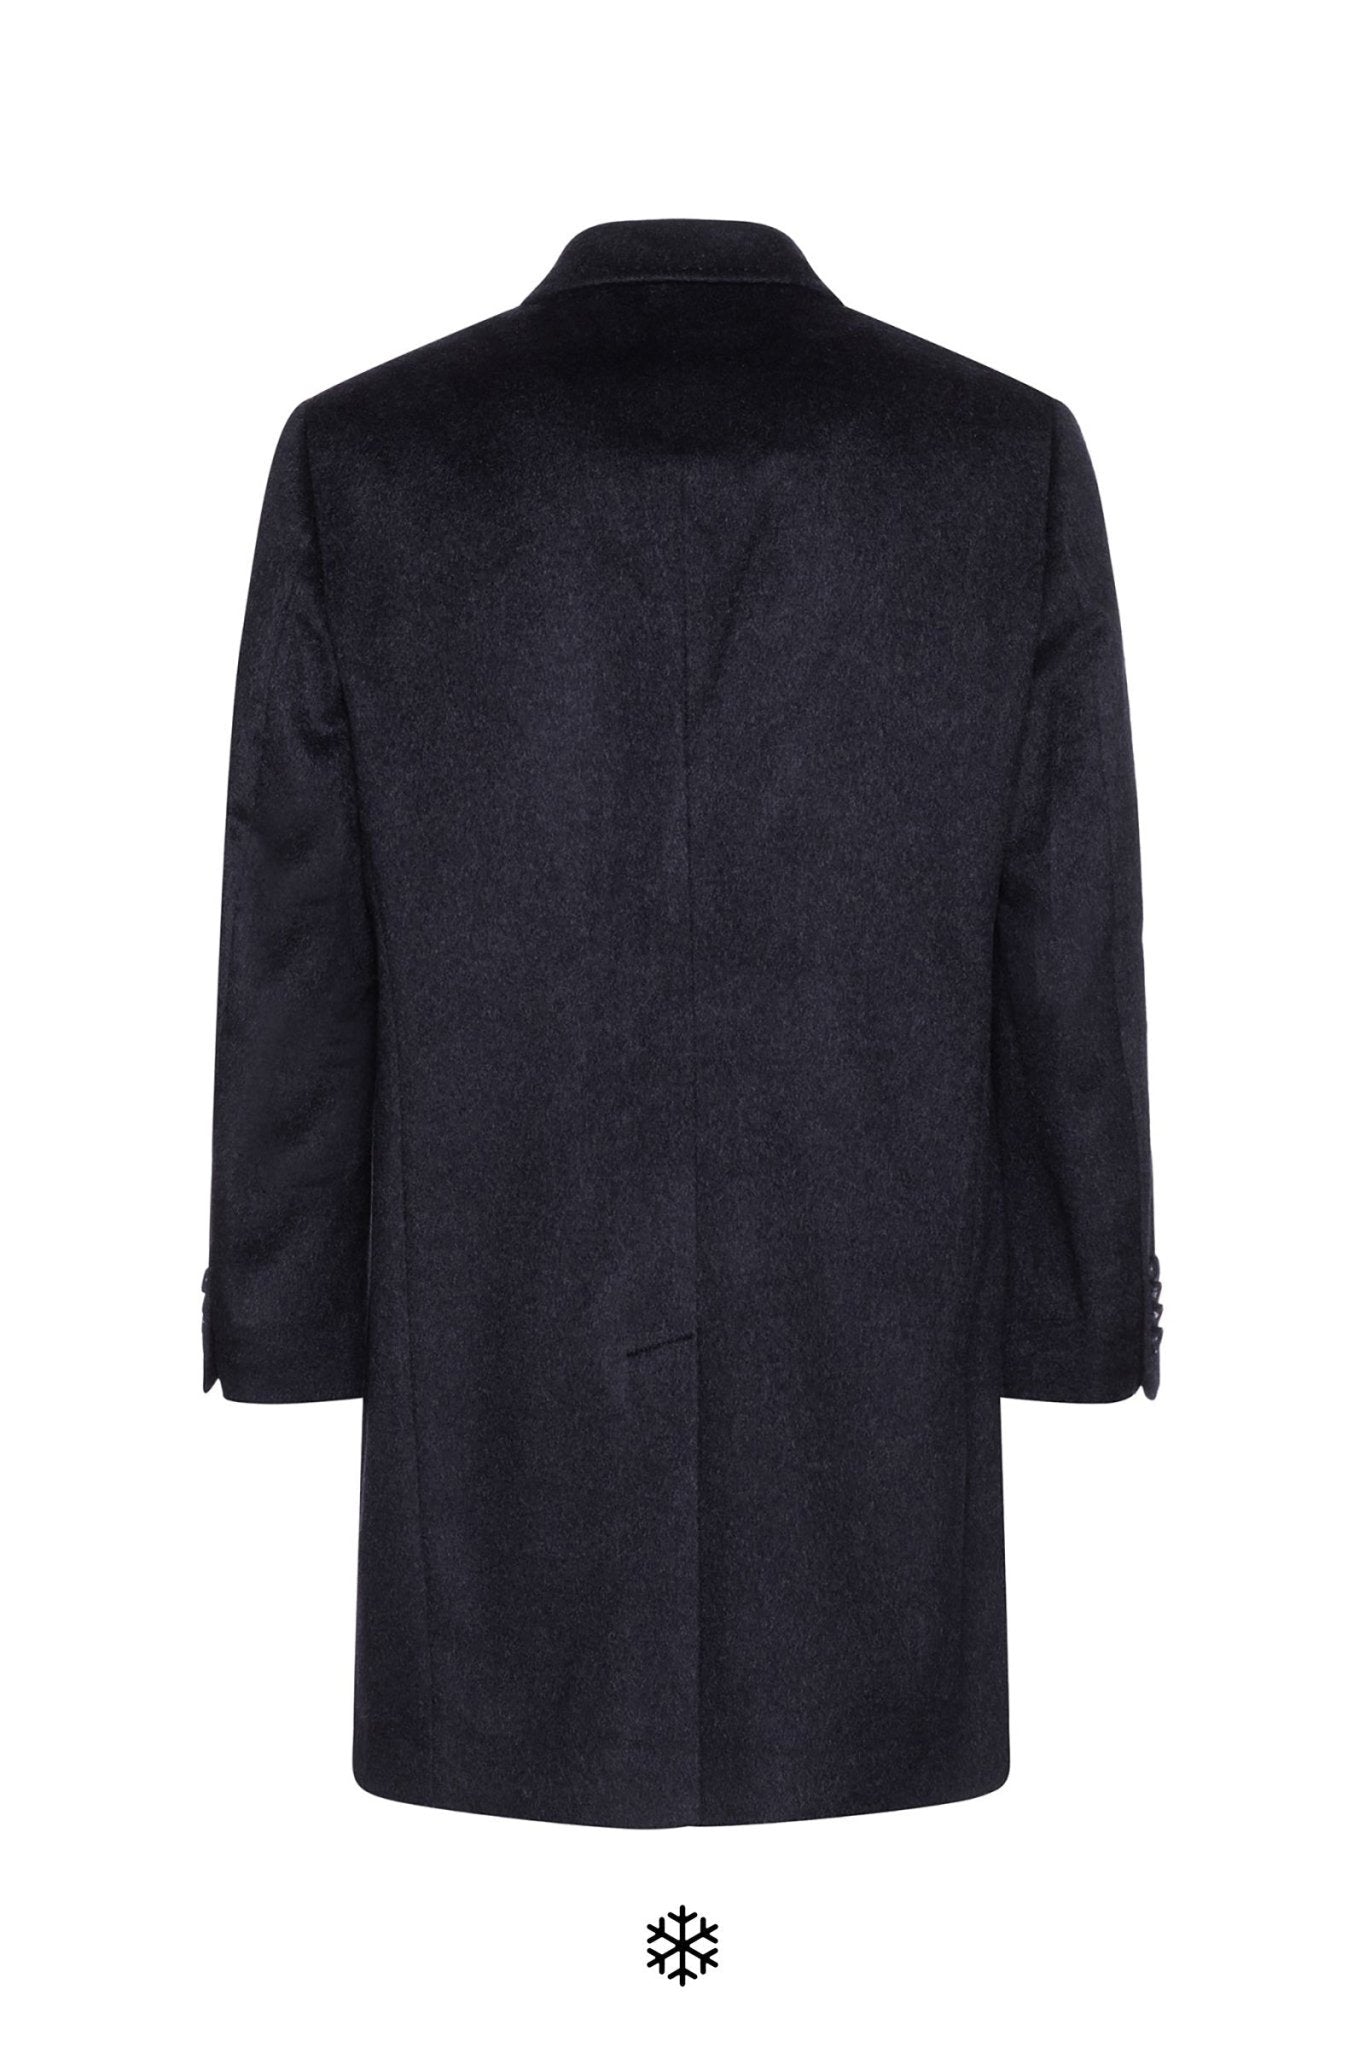 ST-PIERRE NAVY CASHMERE OVERCOAT - Cardinal of Canada-US-ST-PIERRE NAVY CASHMERE OVERCOAT 38 inch length